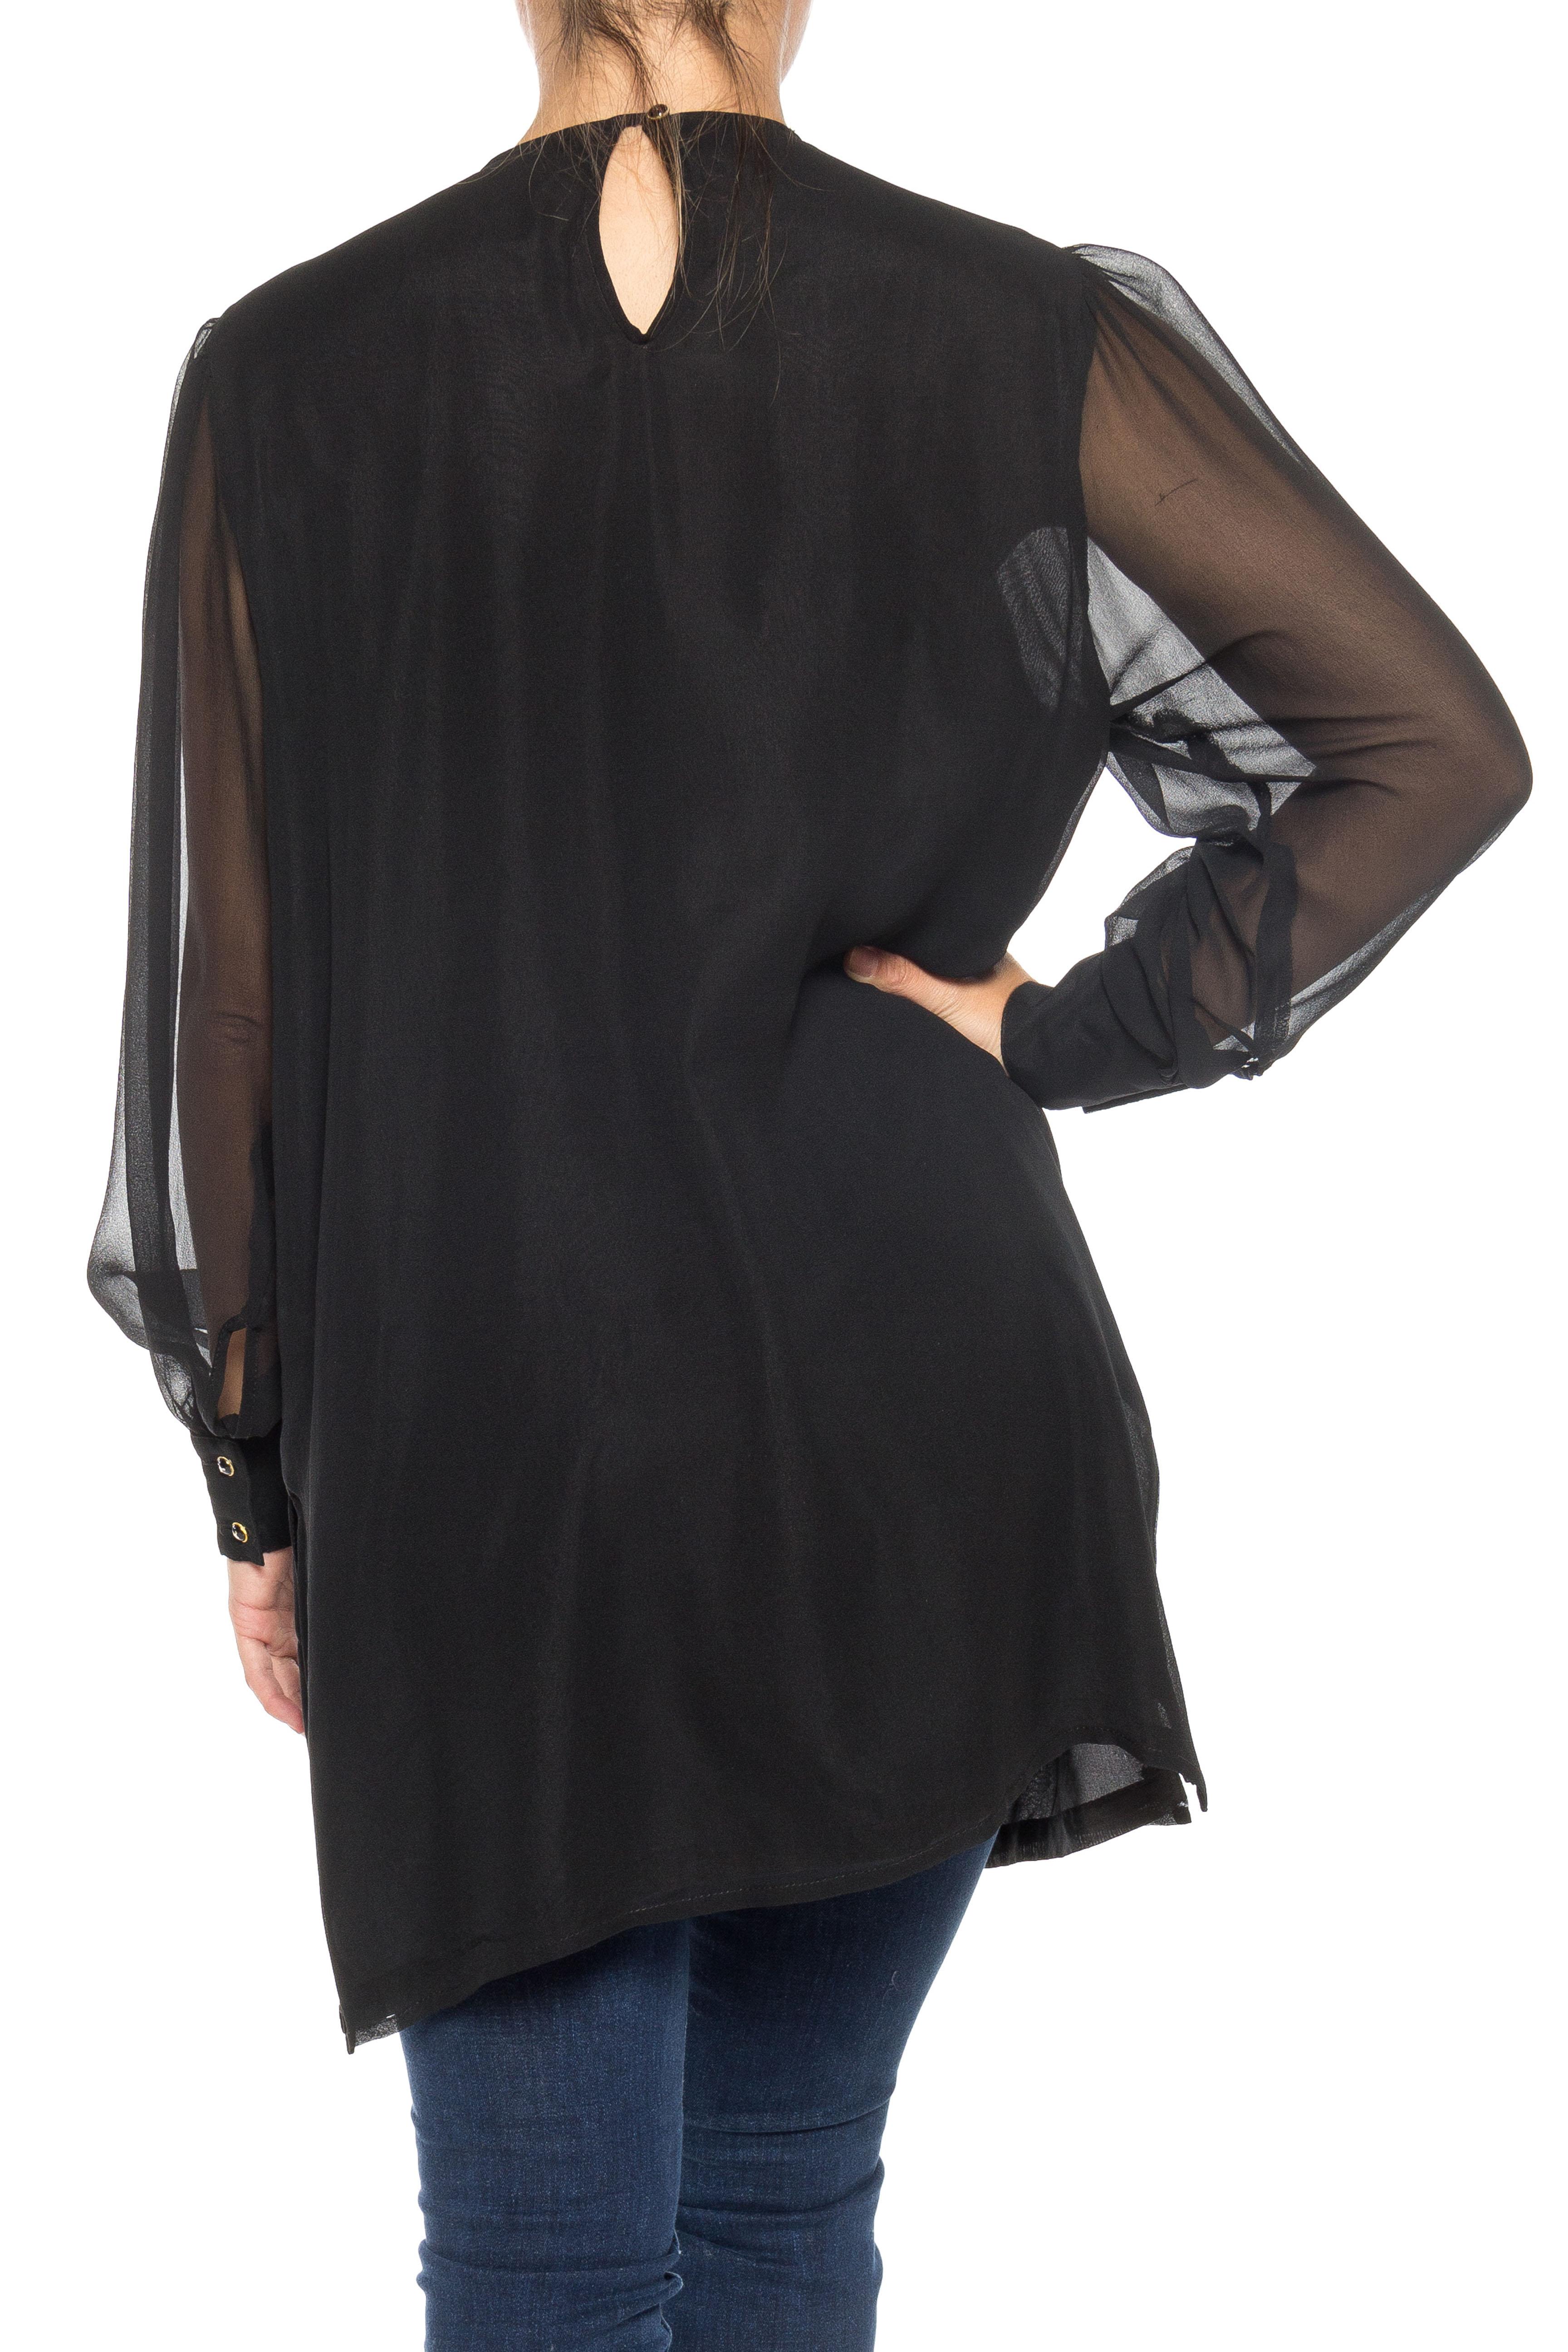 1980S DIANE FREIS Black Beaded Silk Chiffon Cocktail Tunic Blouse With Sheer Sl For Sale 2